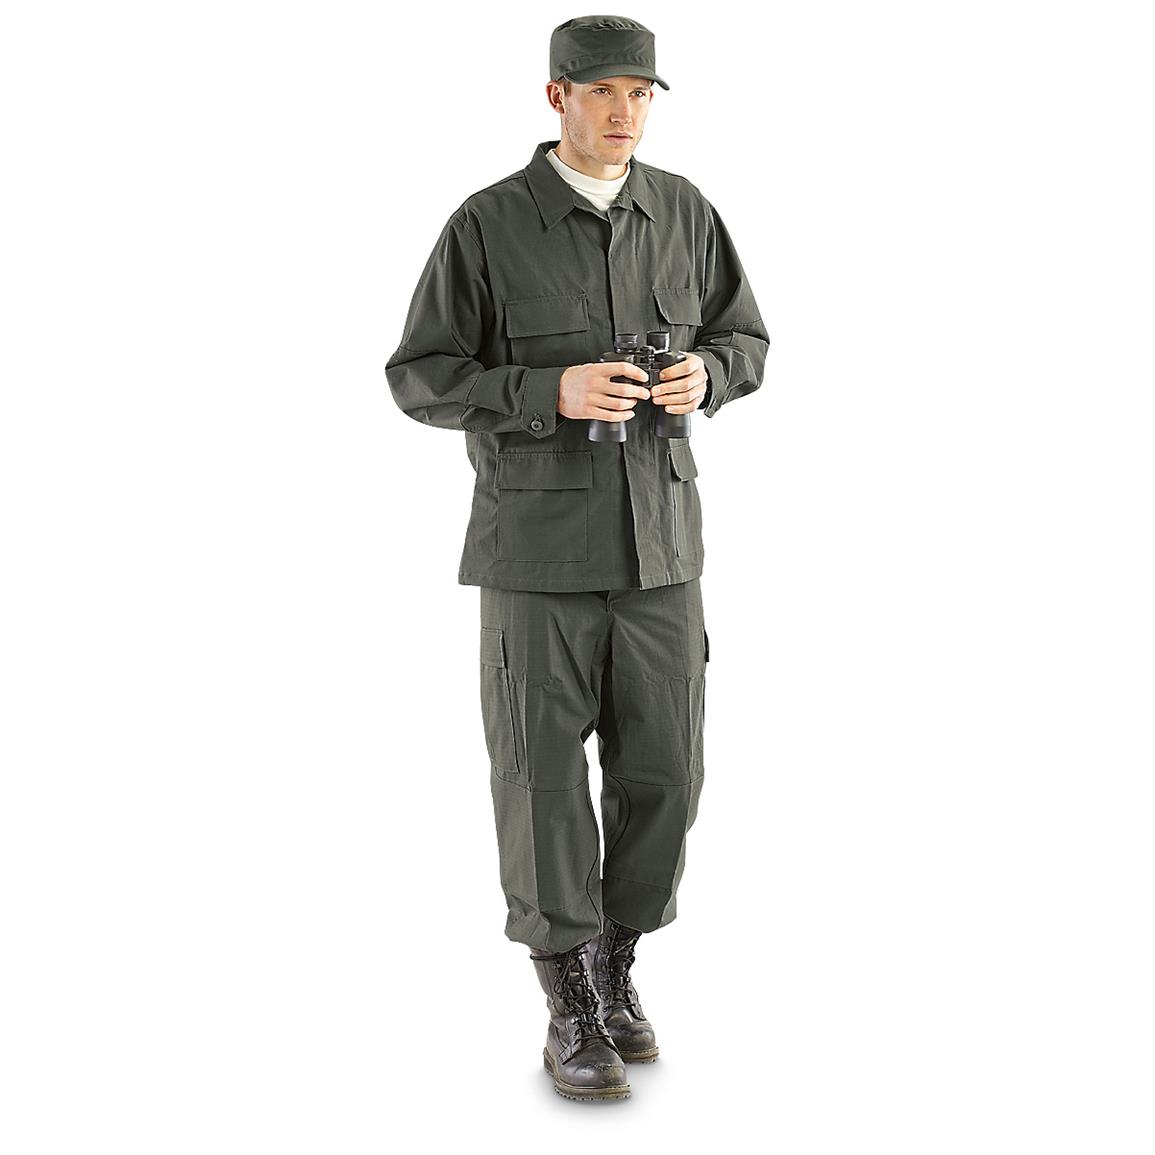 HQ ISSUE® Military-style NYCO Ripstop BDU Shirt, Olive Drab